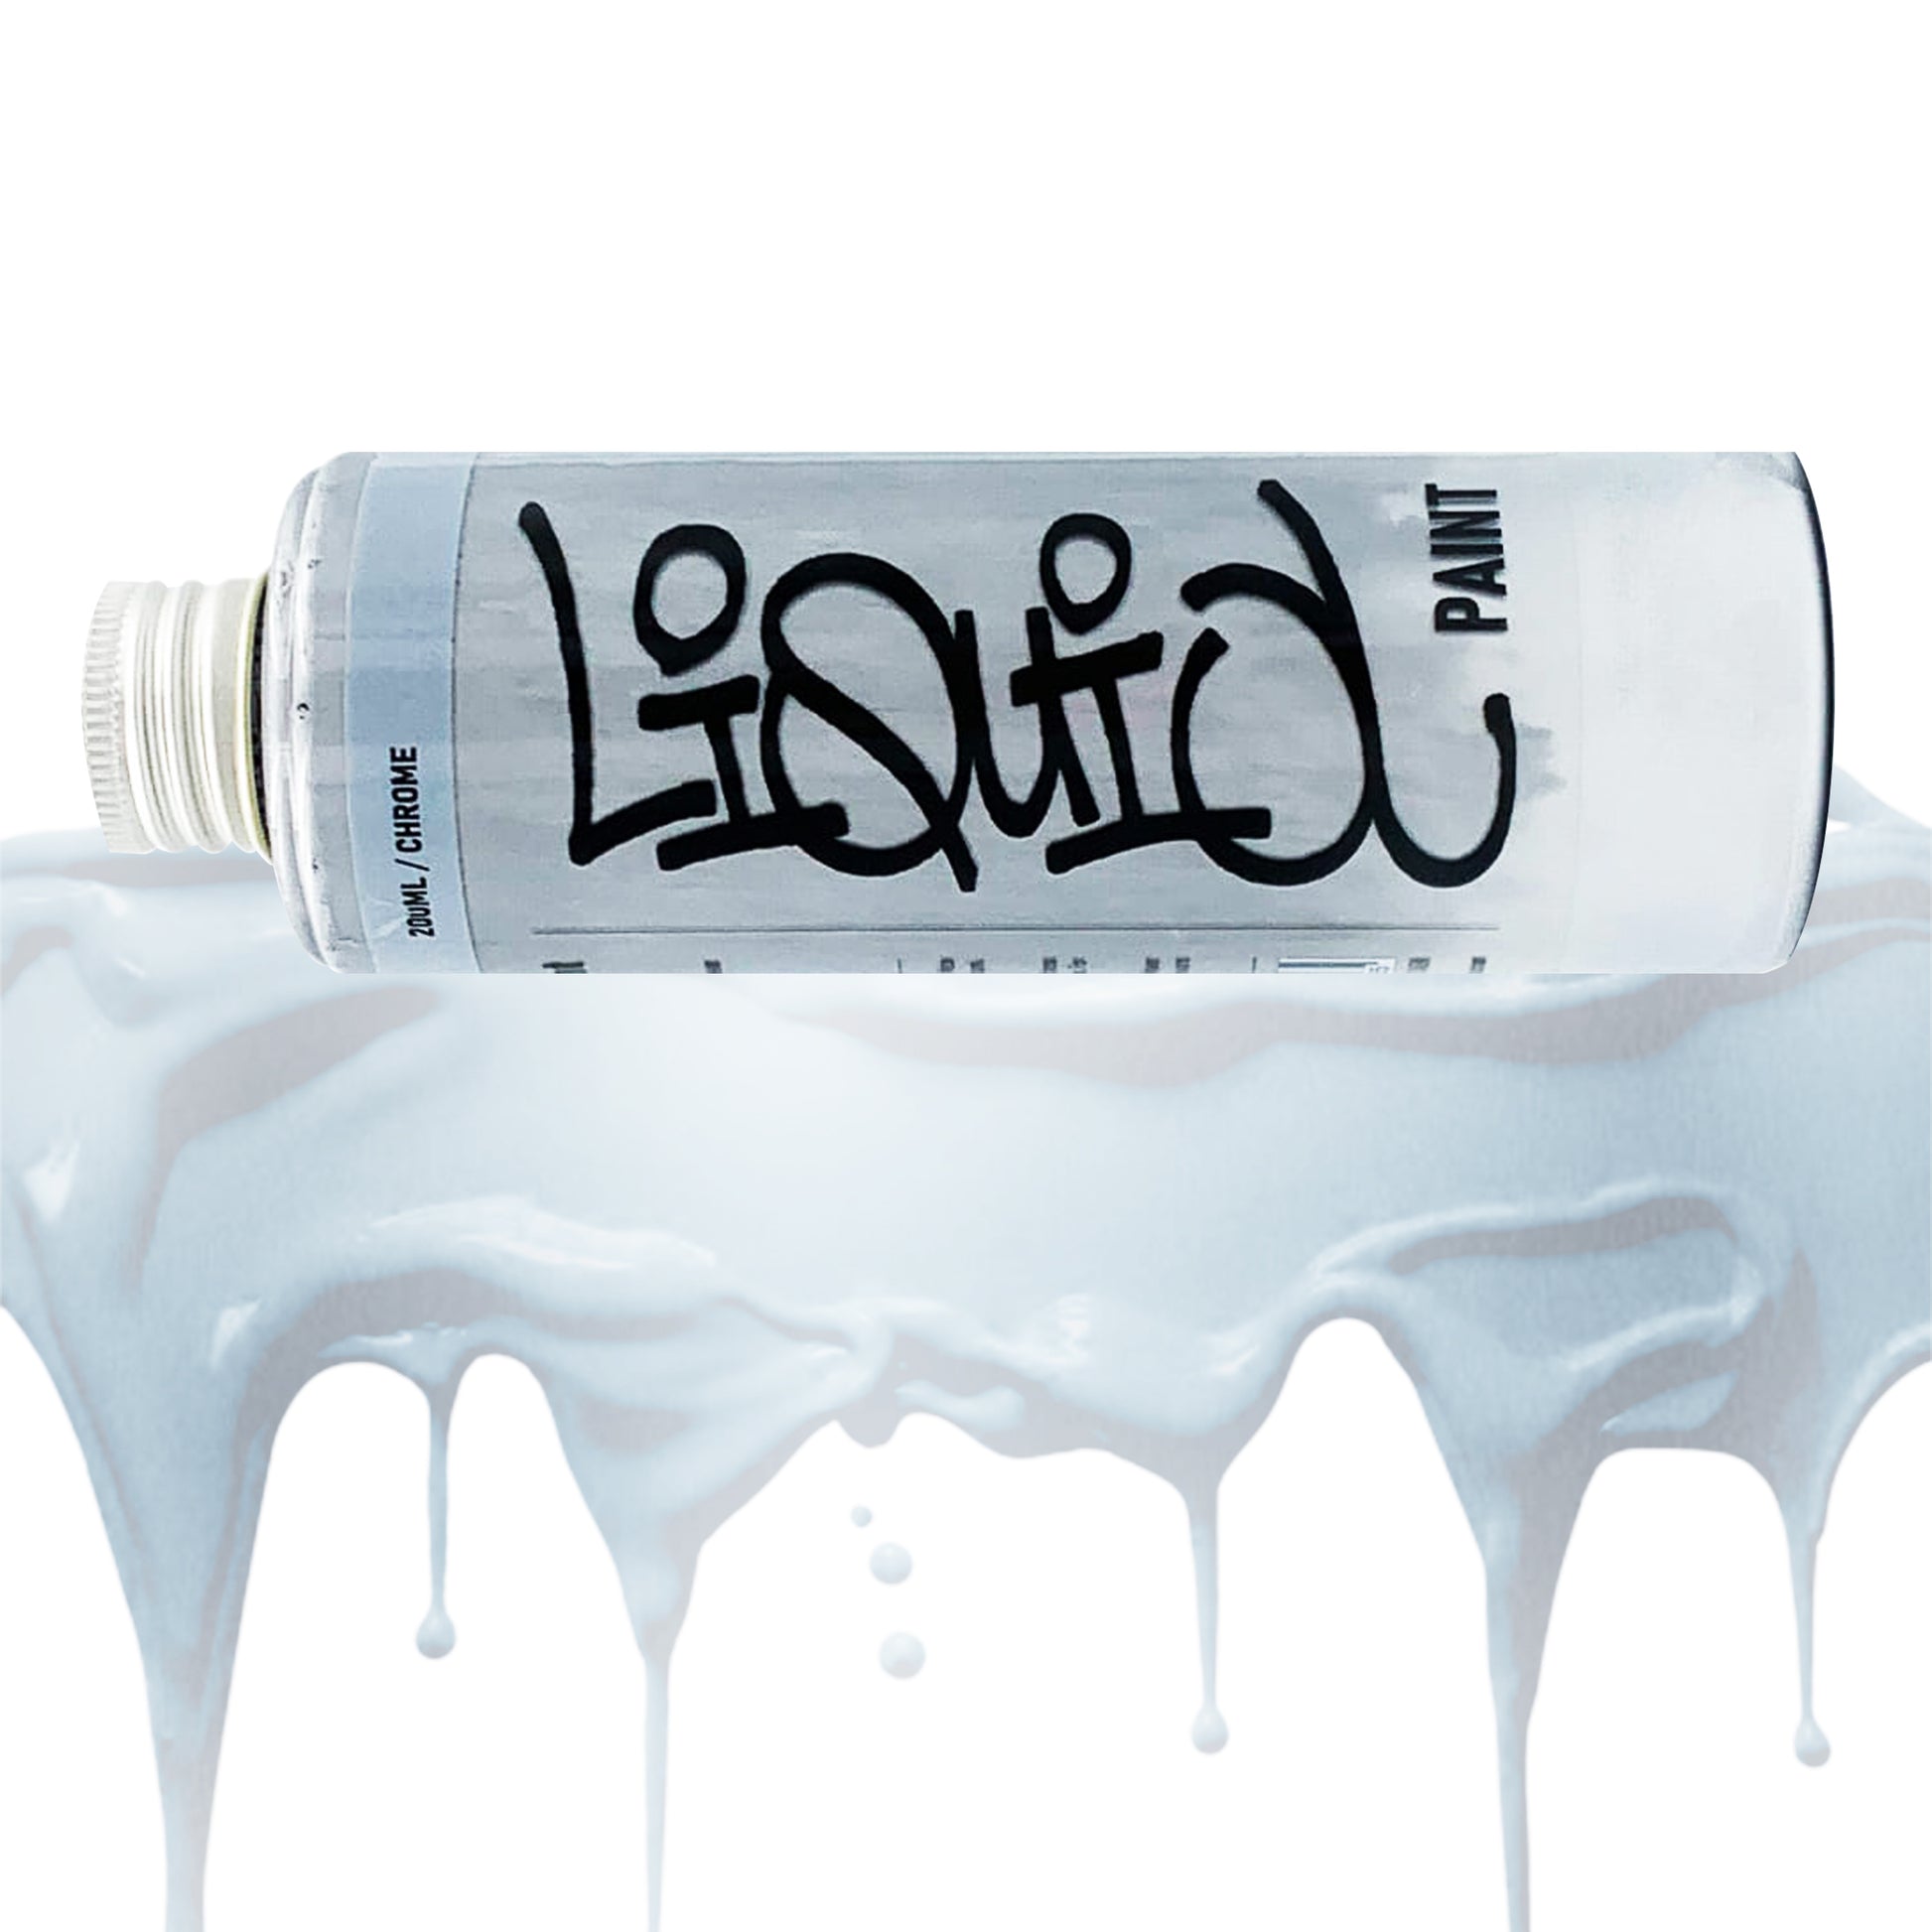 Bottle of Chrome refill Liquid Ink with silver cap on a Chrome dripping swatch